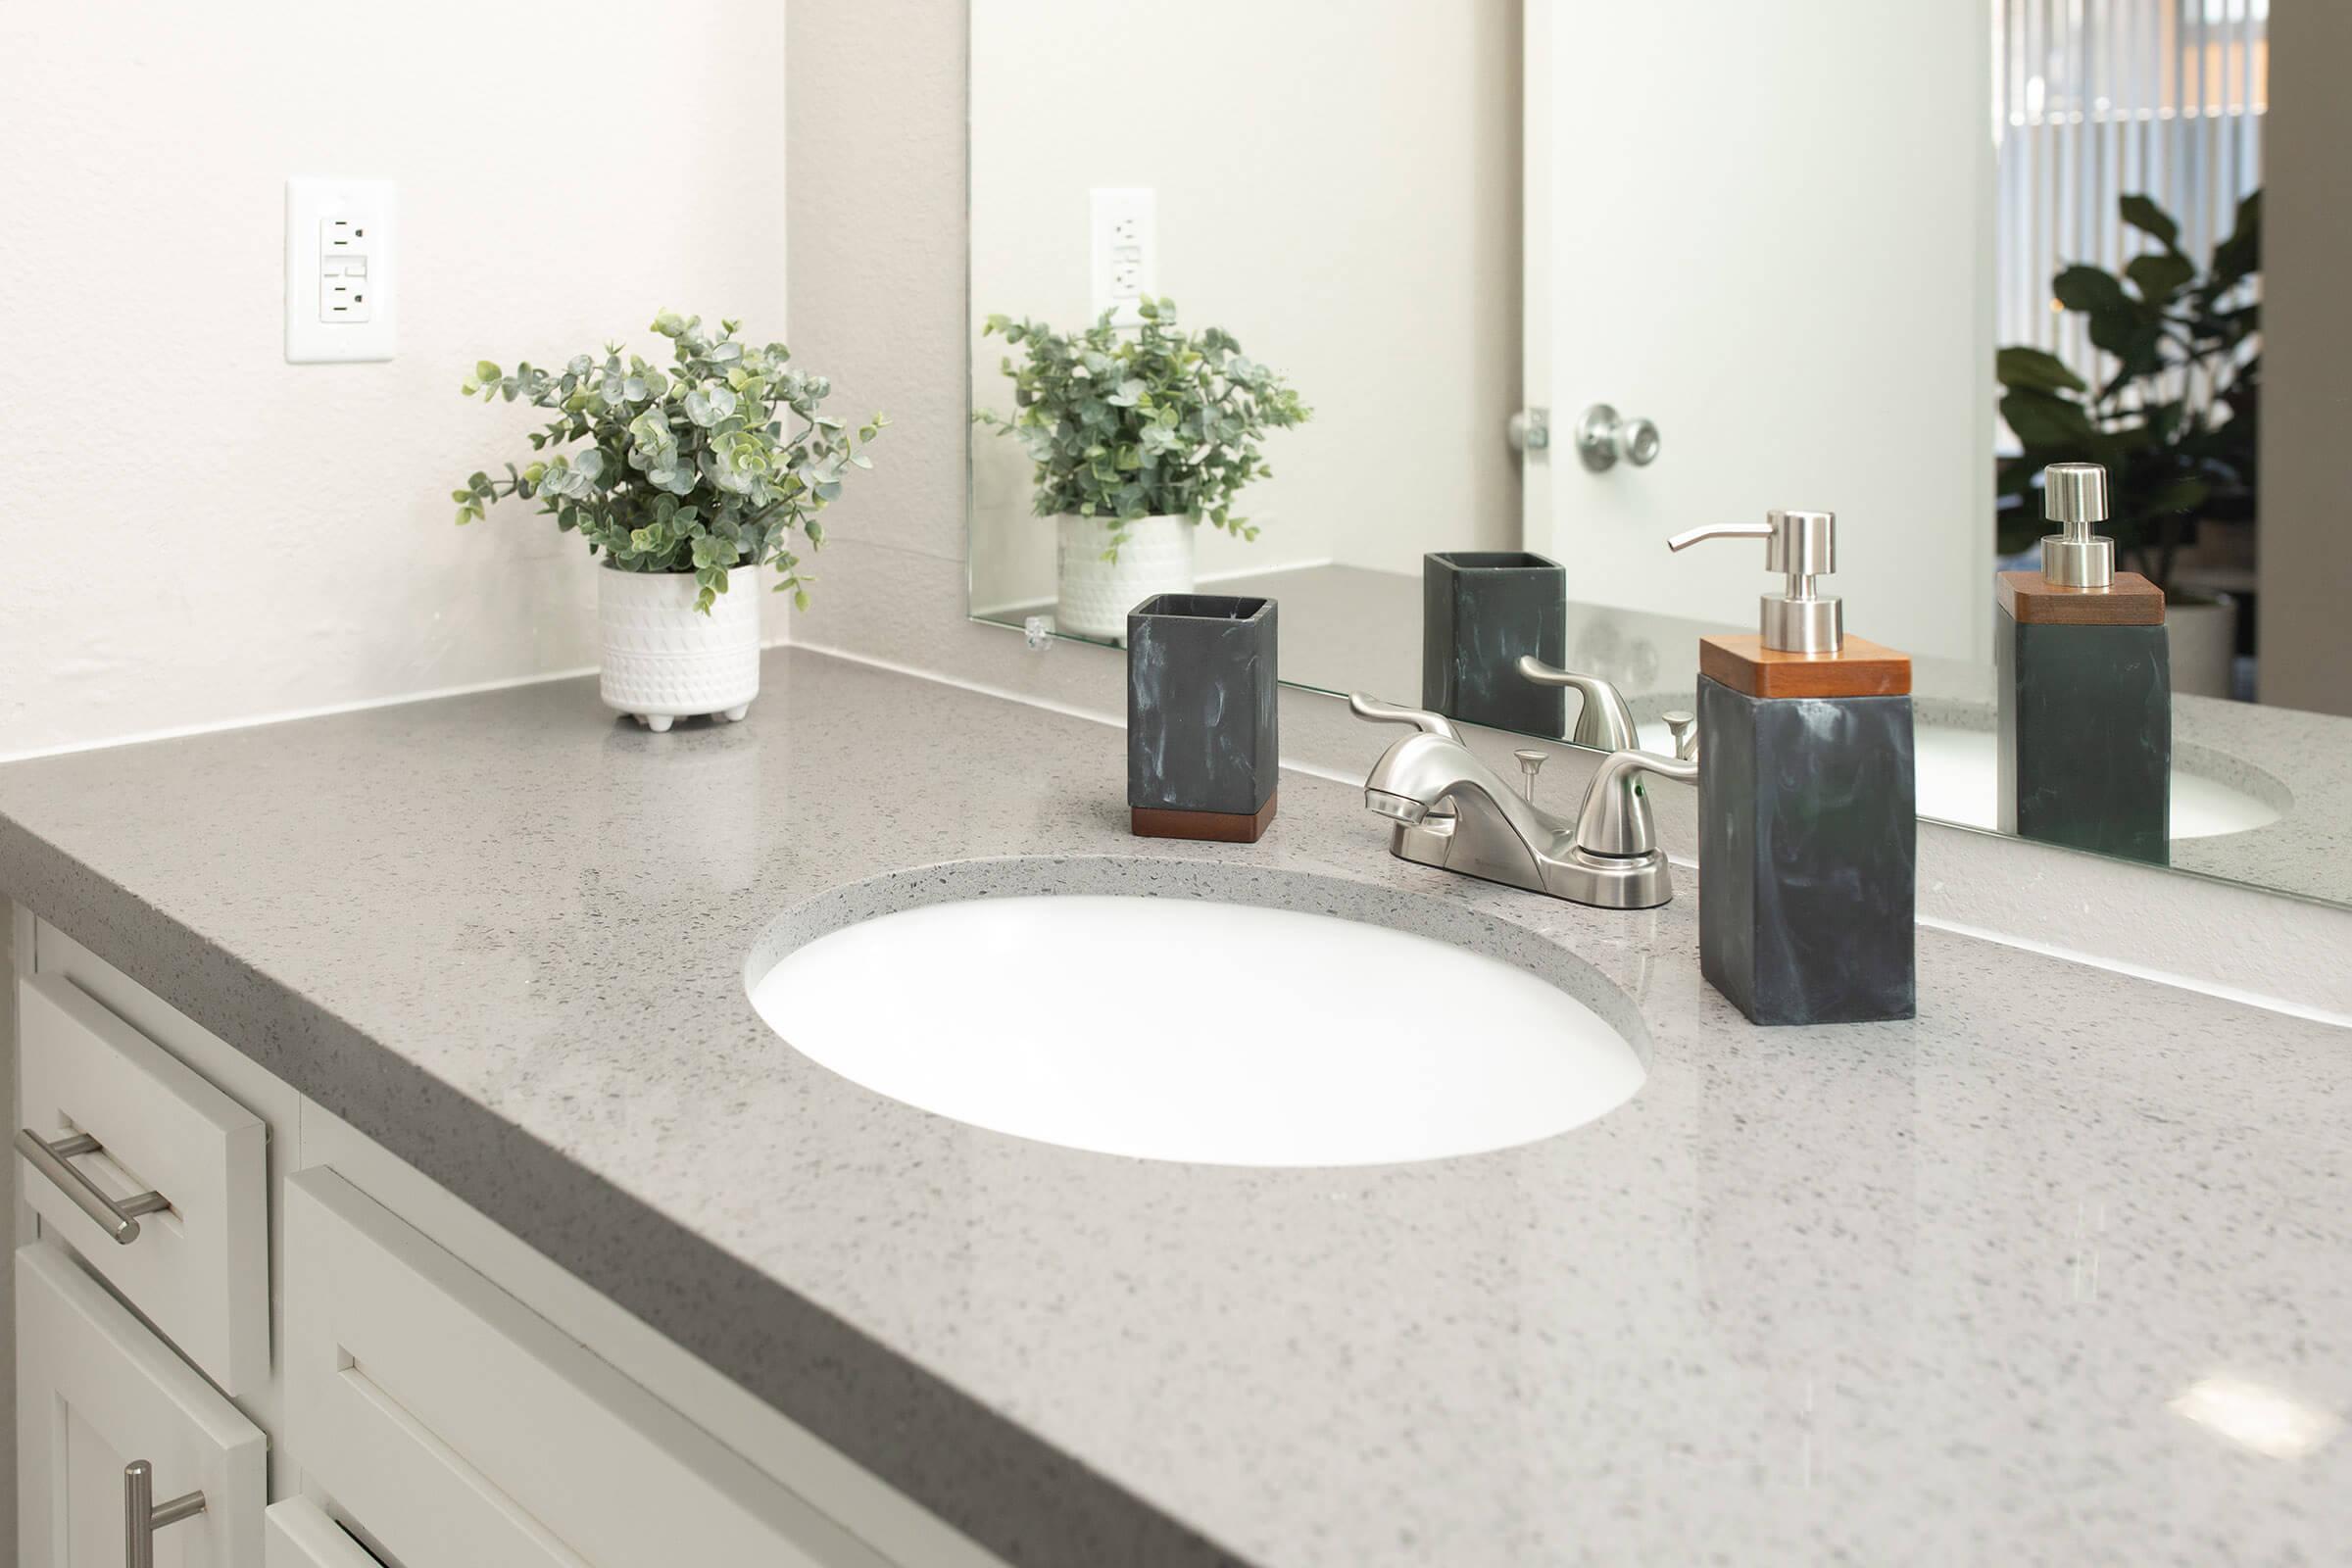 Grey quartz bathroom counter top with soap dispenser, toothbrush holder, and a small plant